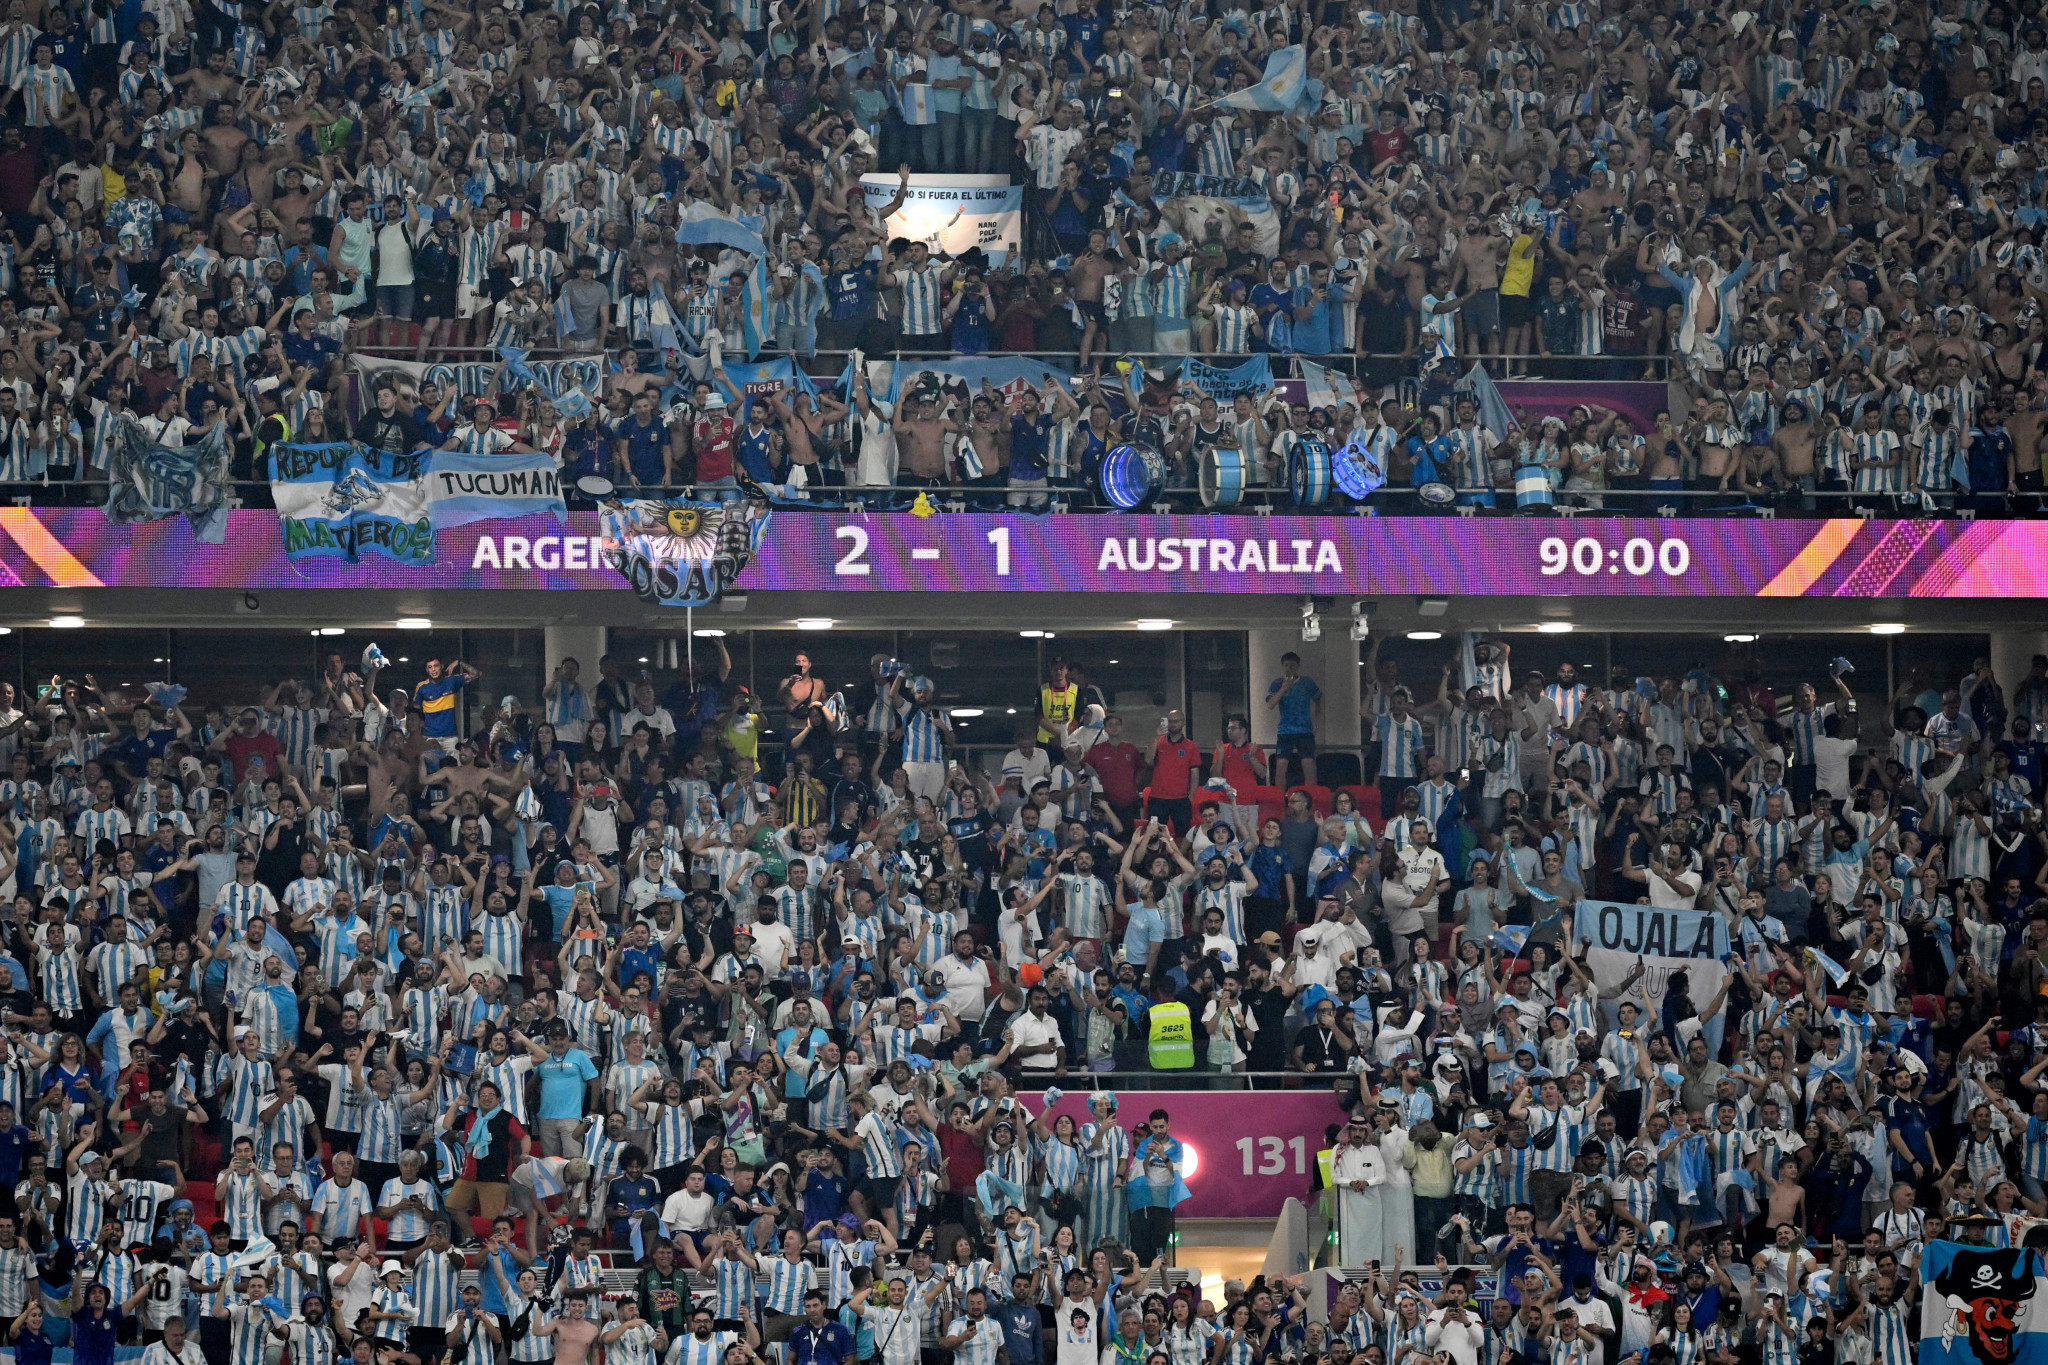 Argentina fans came out in big numbers at the Ahmad bin Ali Stadium ©Getty Images